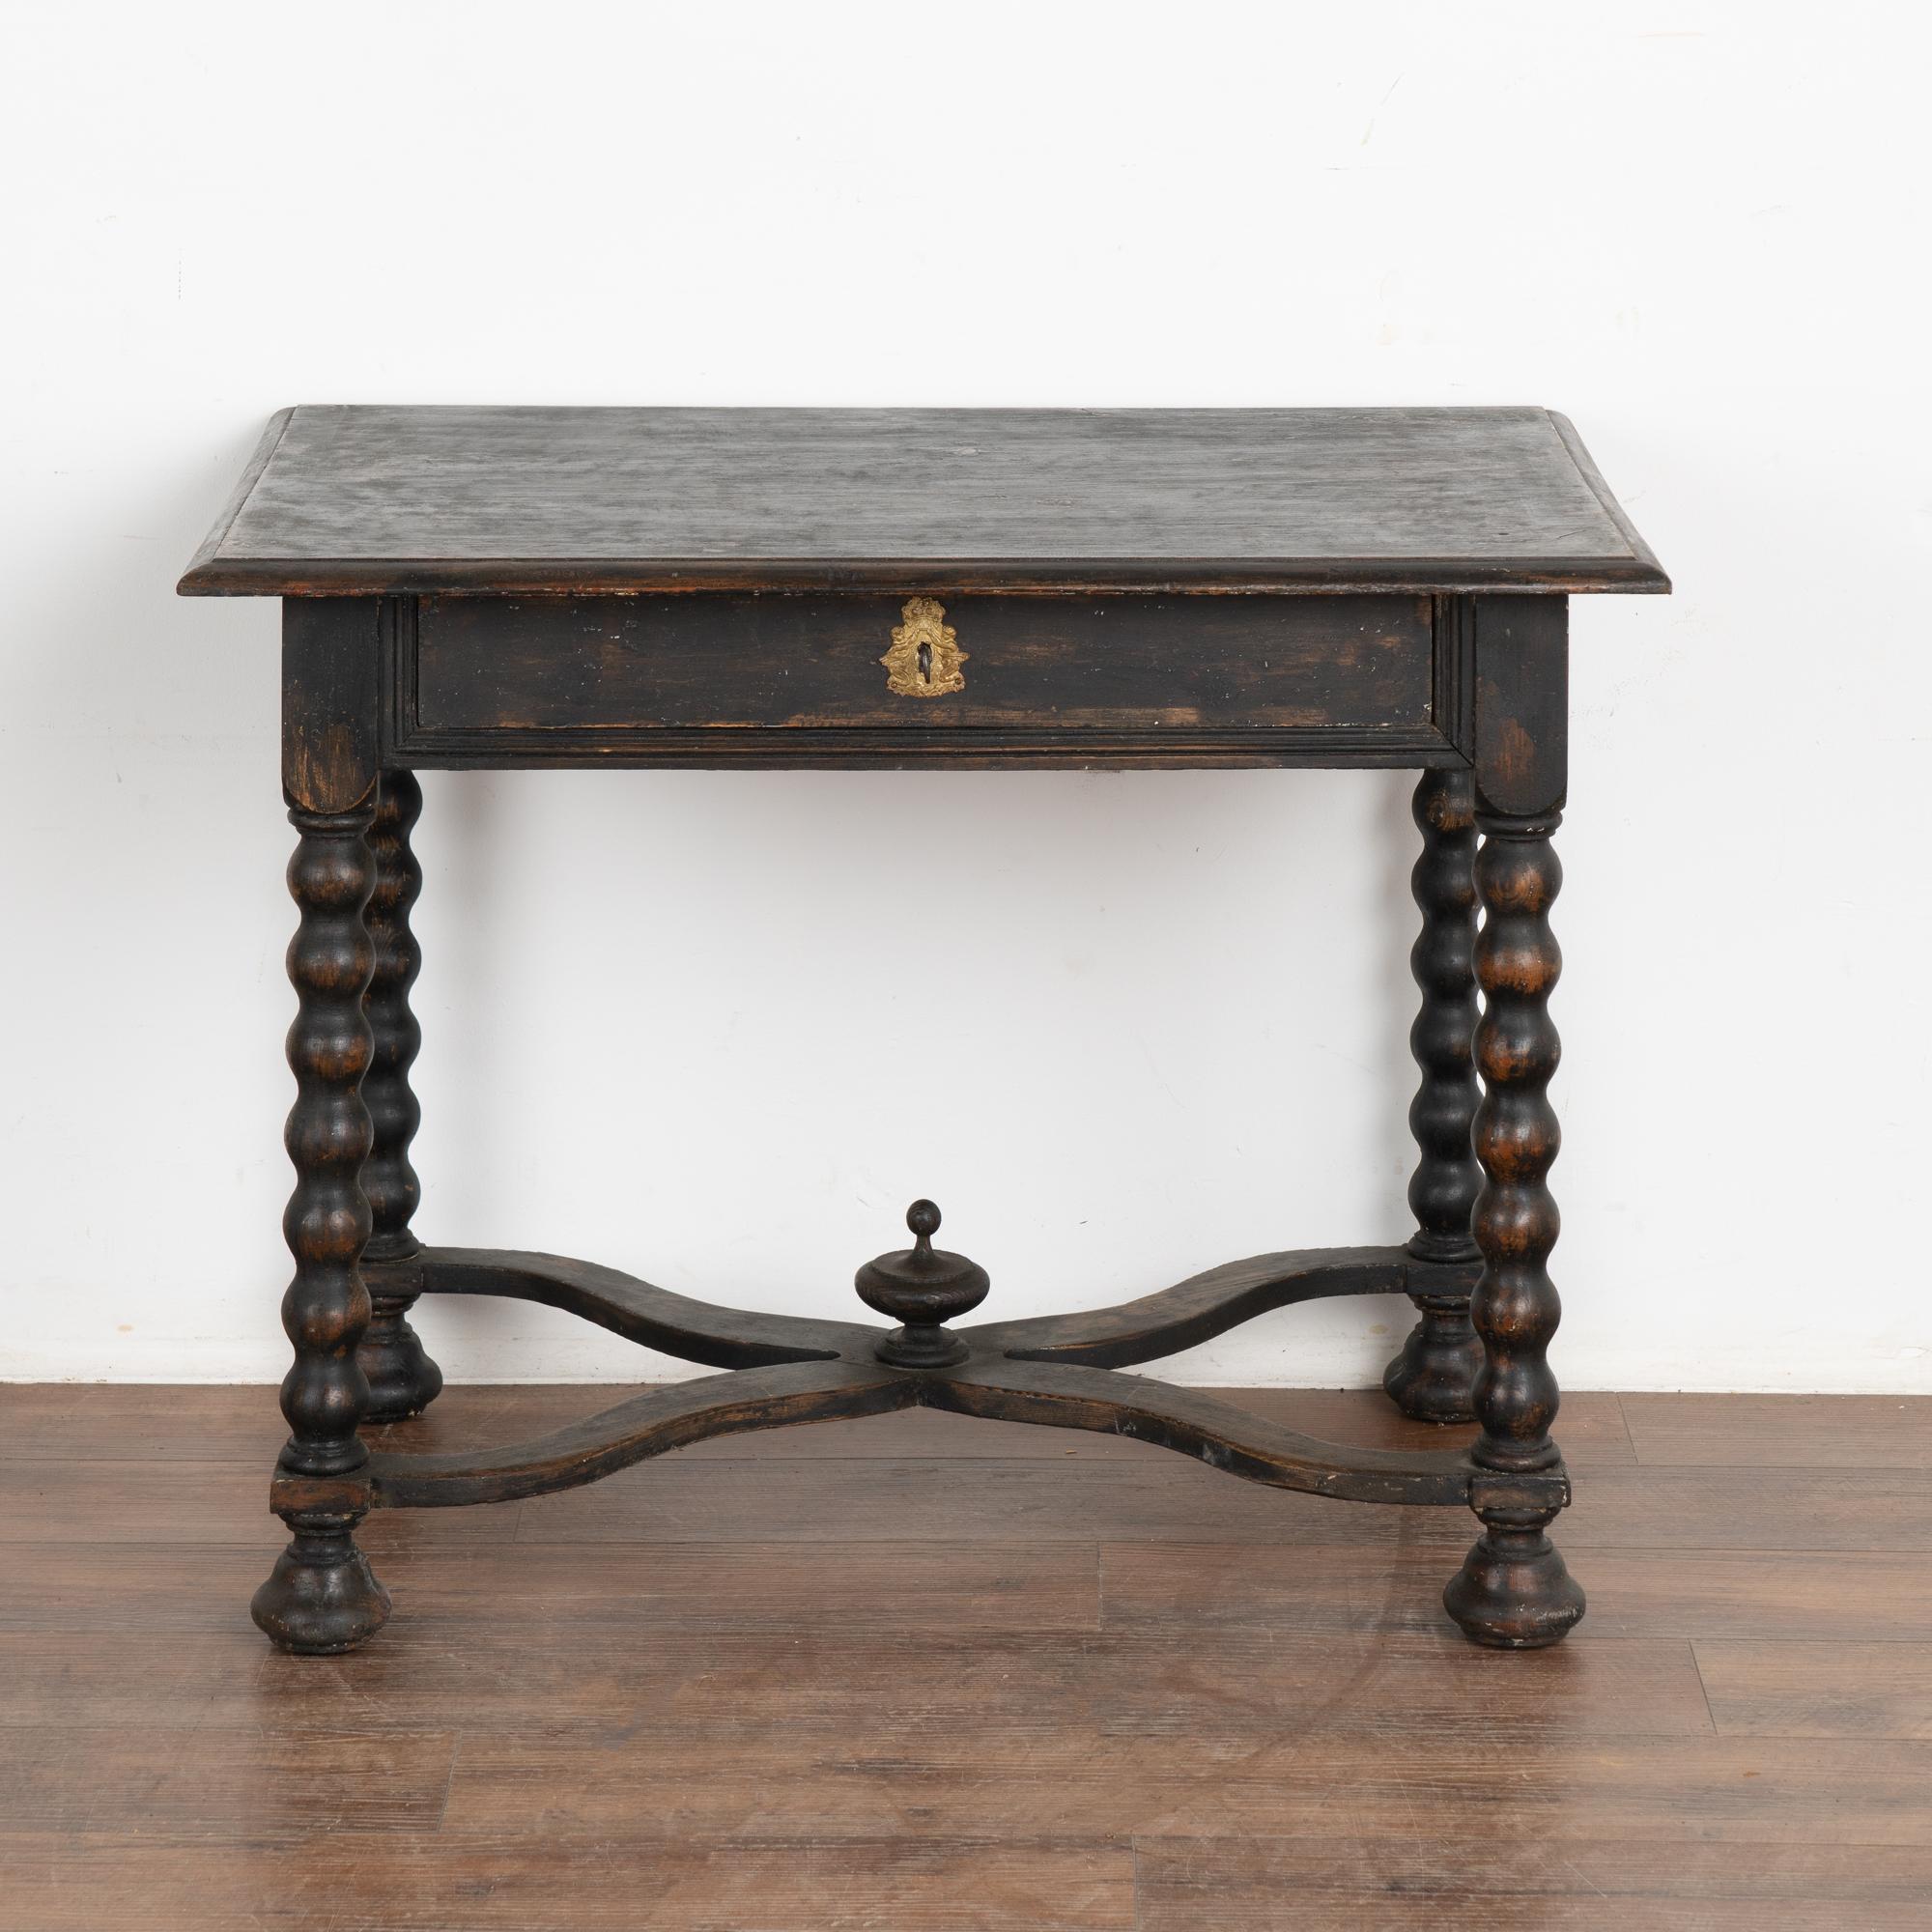 Country Black Painted Side Table With Turned Legs, Sweden circa 1840